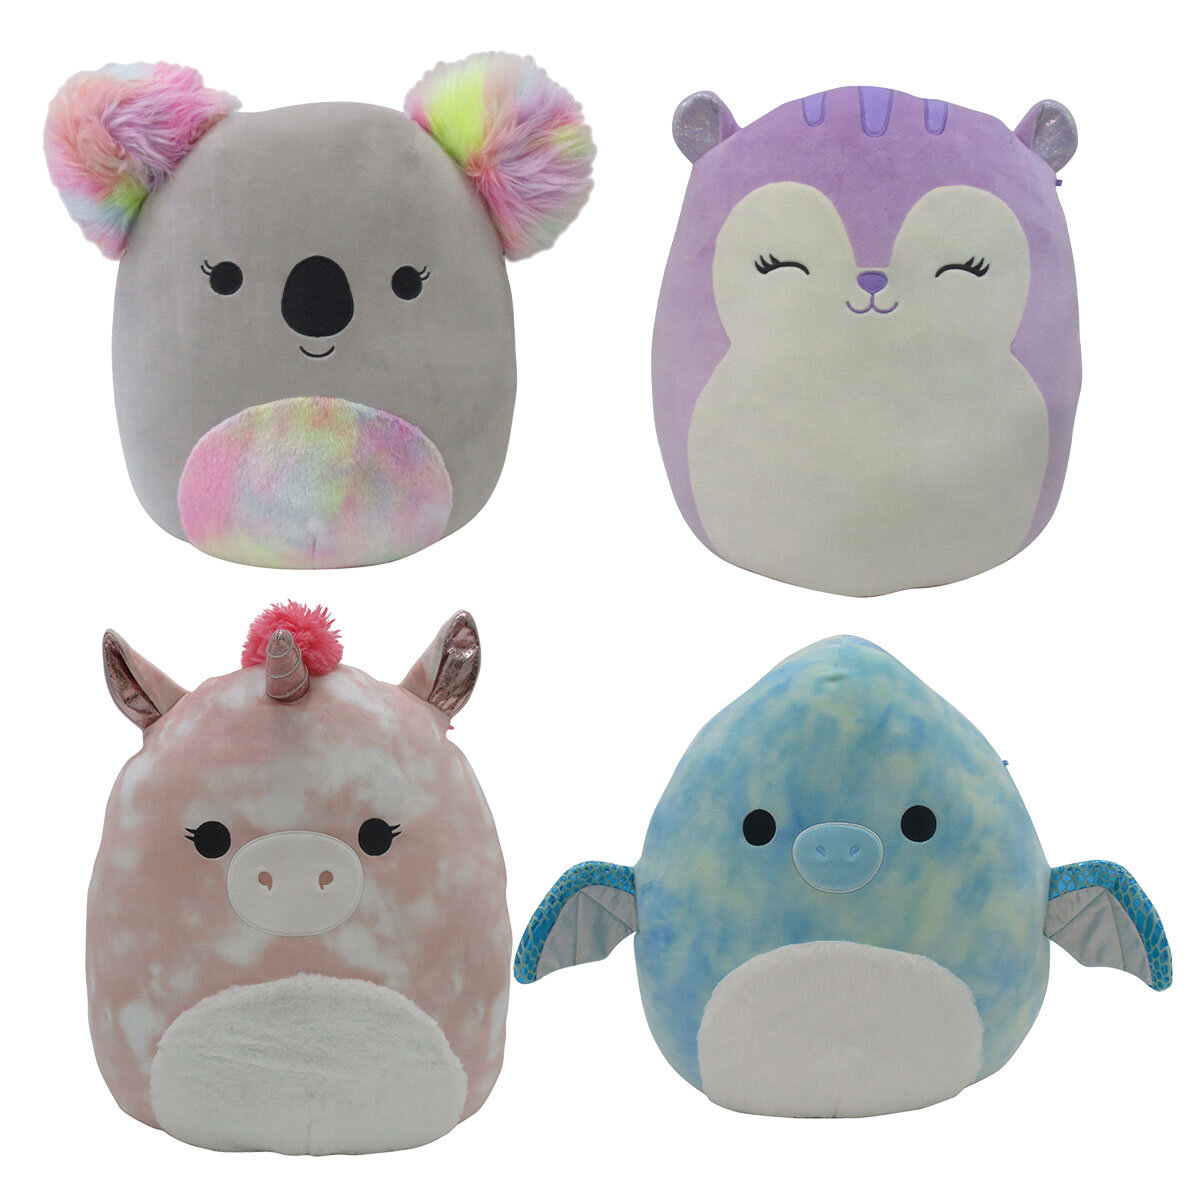 Buy 16" Squishmallows 4 Pack Combined Image at Costco.co.uk